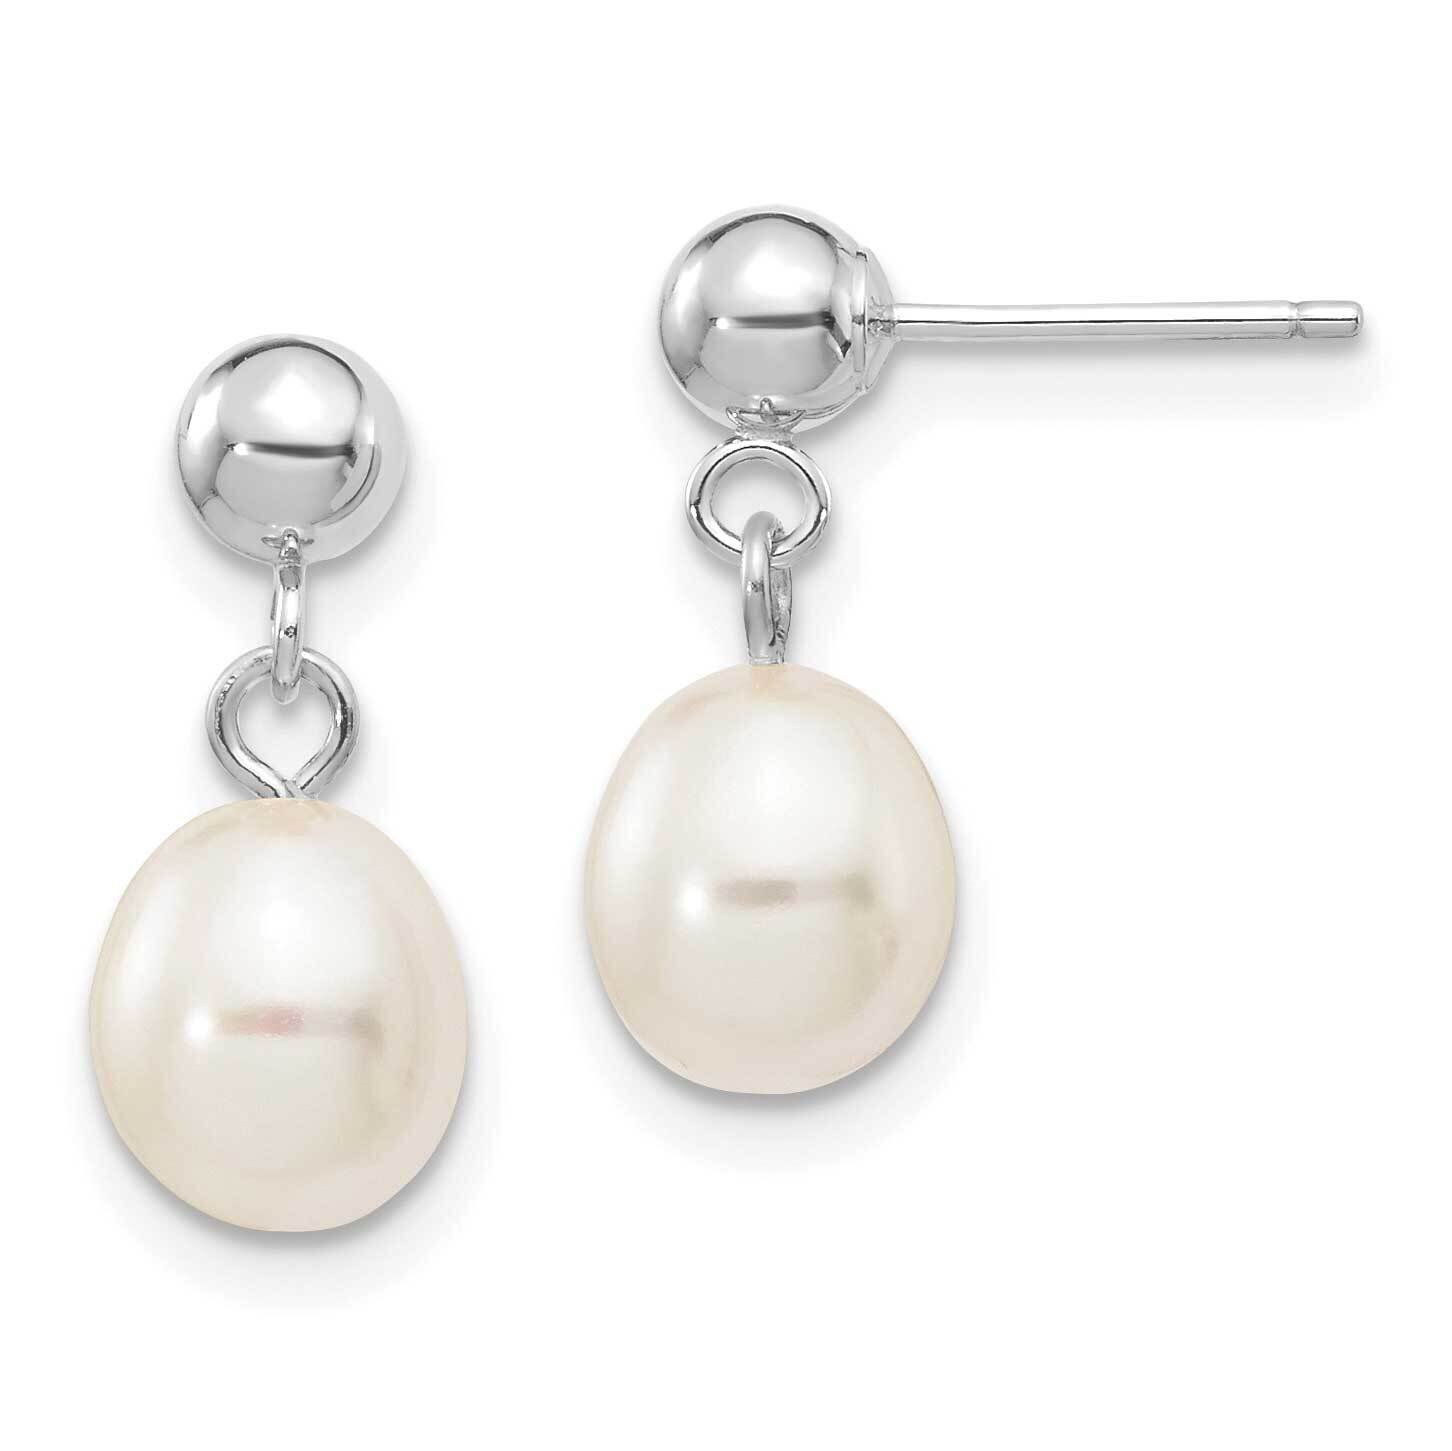 6-7mm White Rice Freshwater Cultured Pearl Dangle Post Earrings 14k White Gold XFW252E